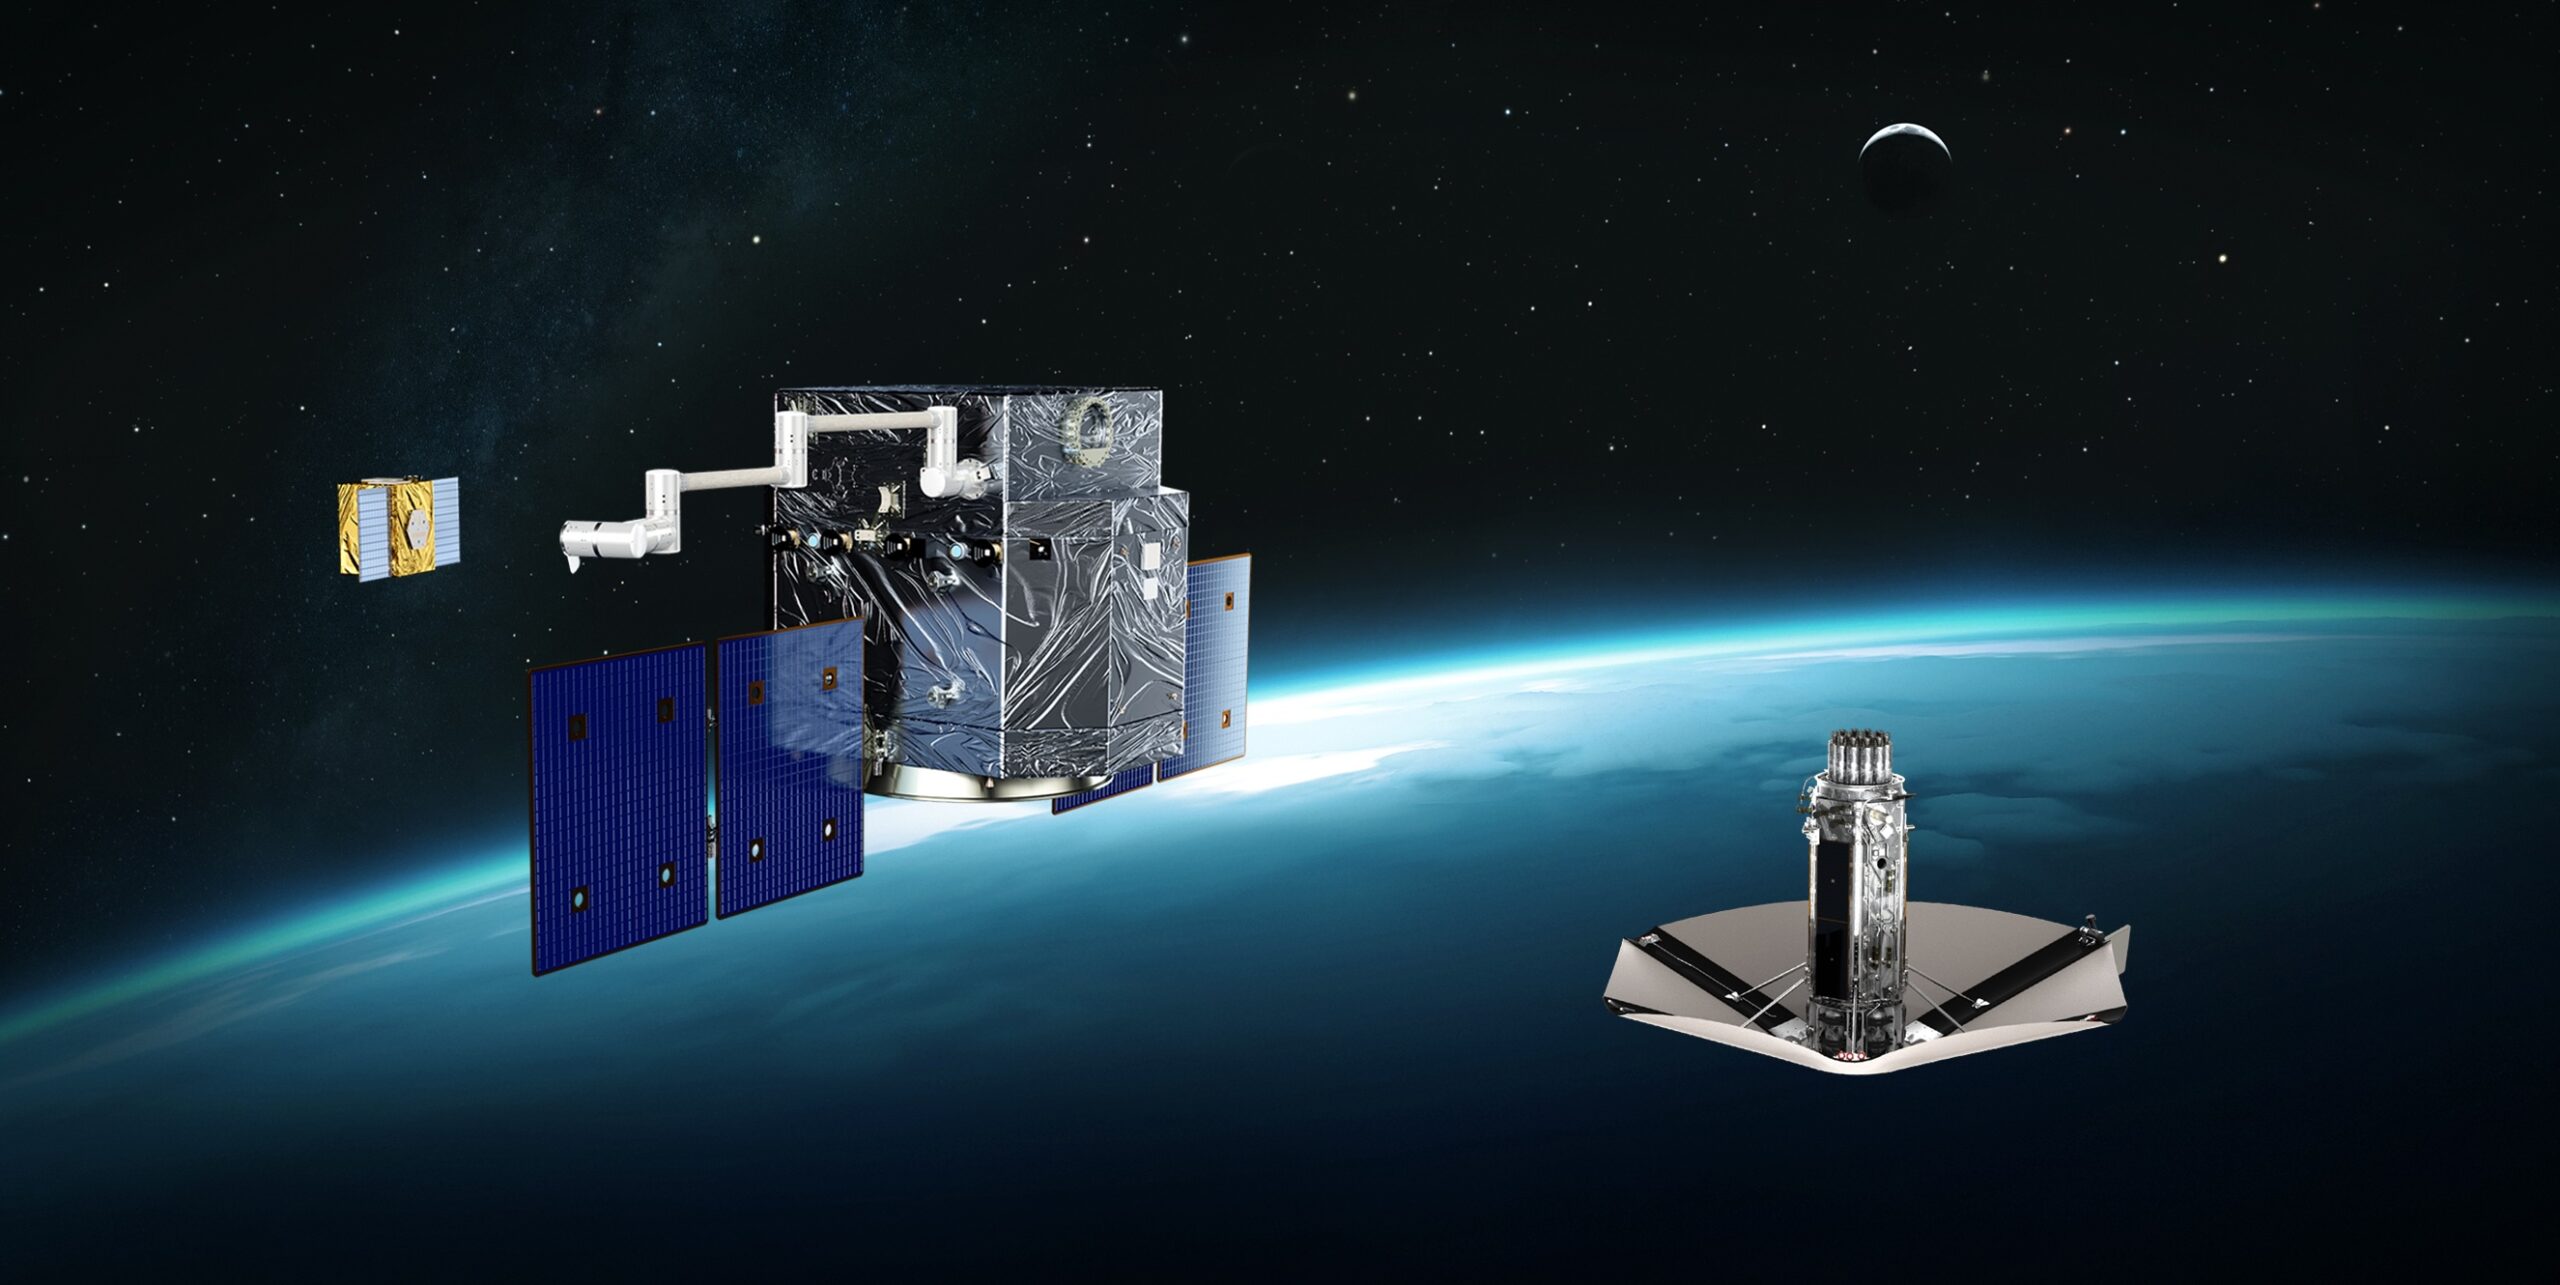 Sierra Space developing dual-use spacecraft with military potential